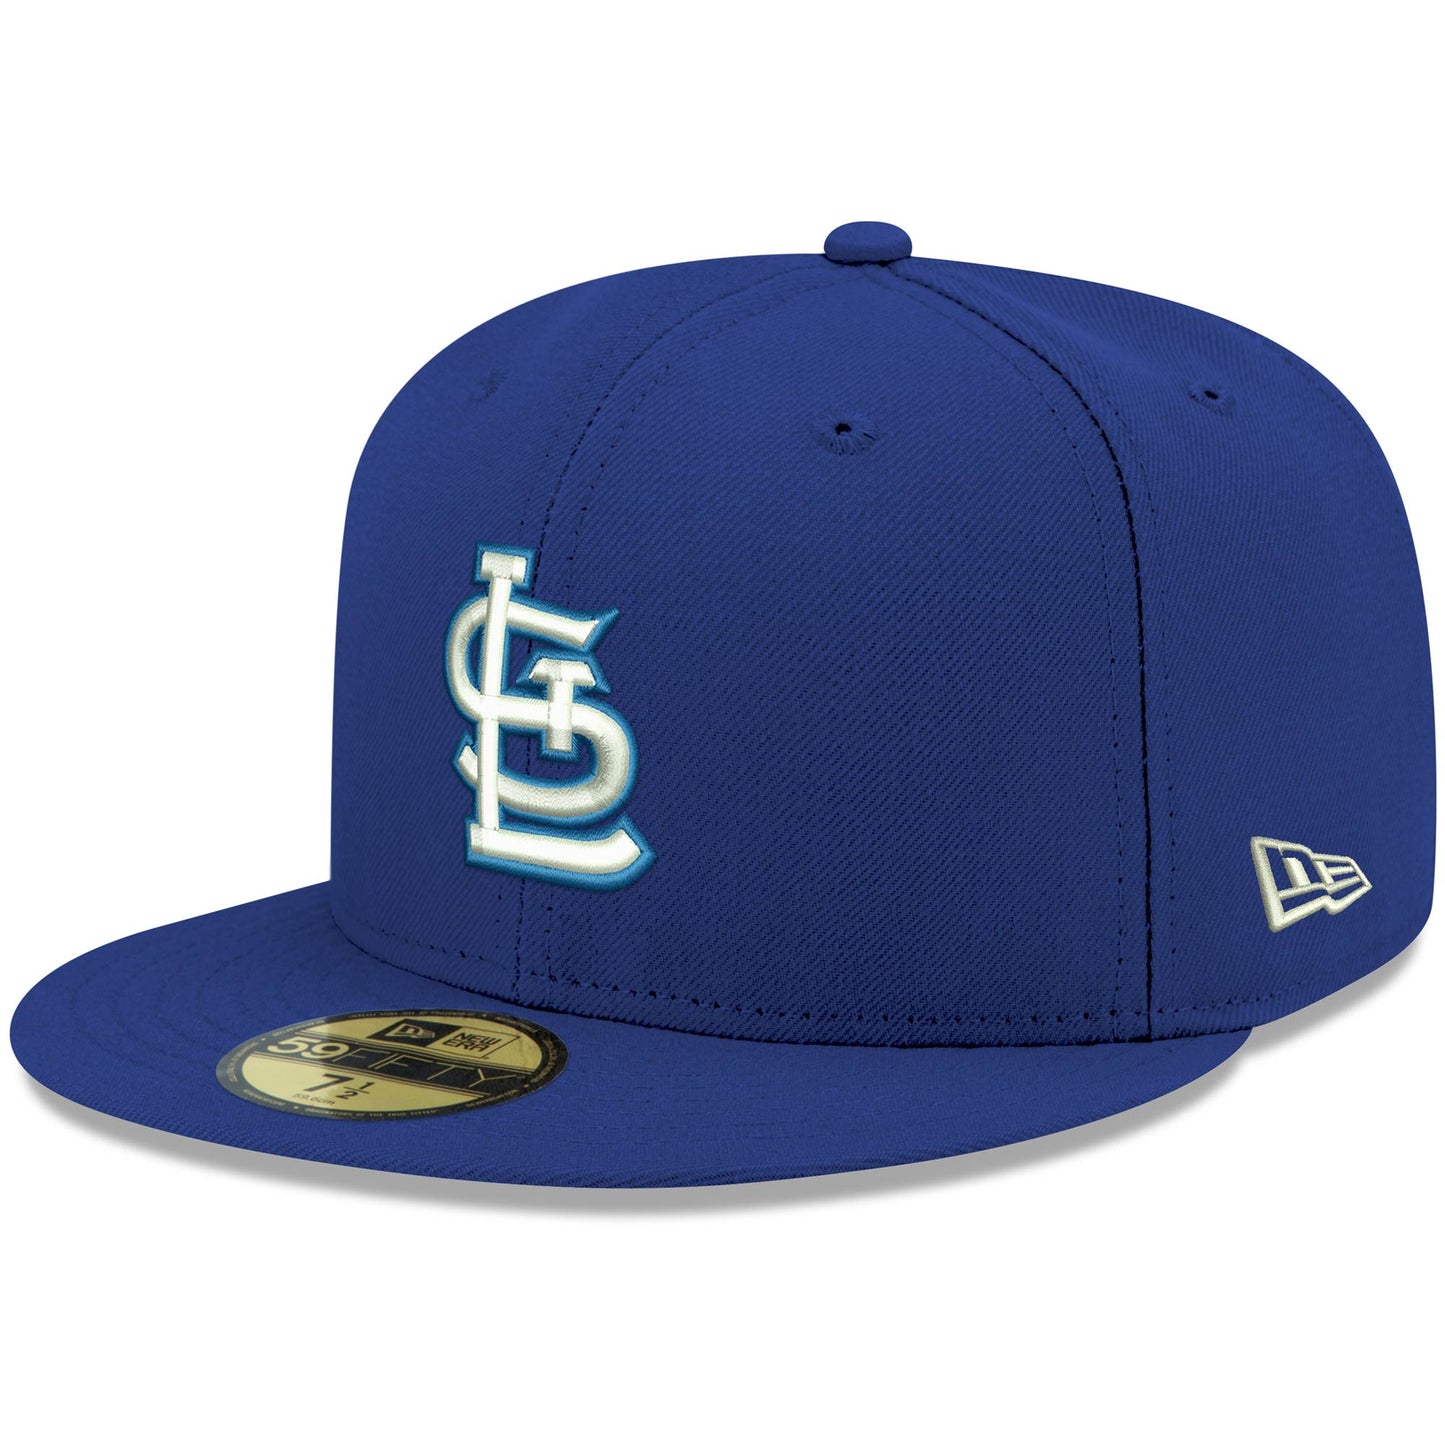 St. Louis Cardinals New Era White Logo 59FIFTY Fitted Hat - Royal